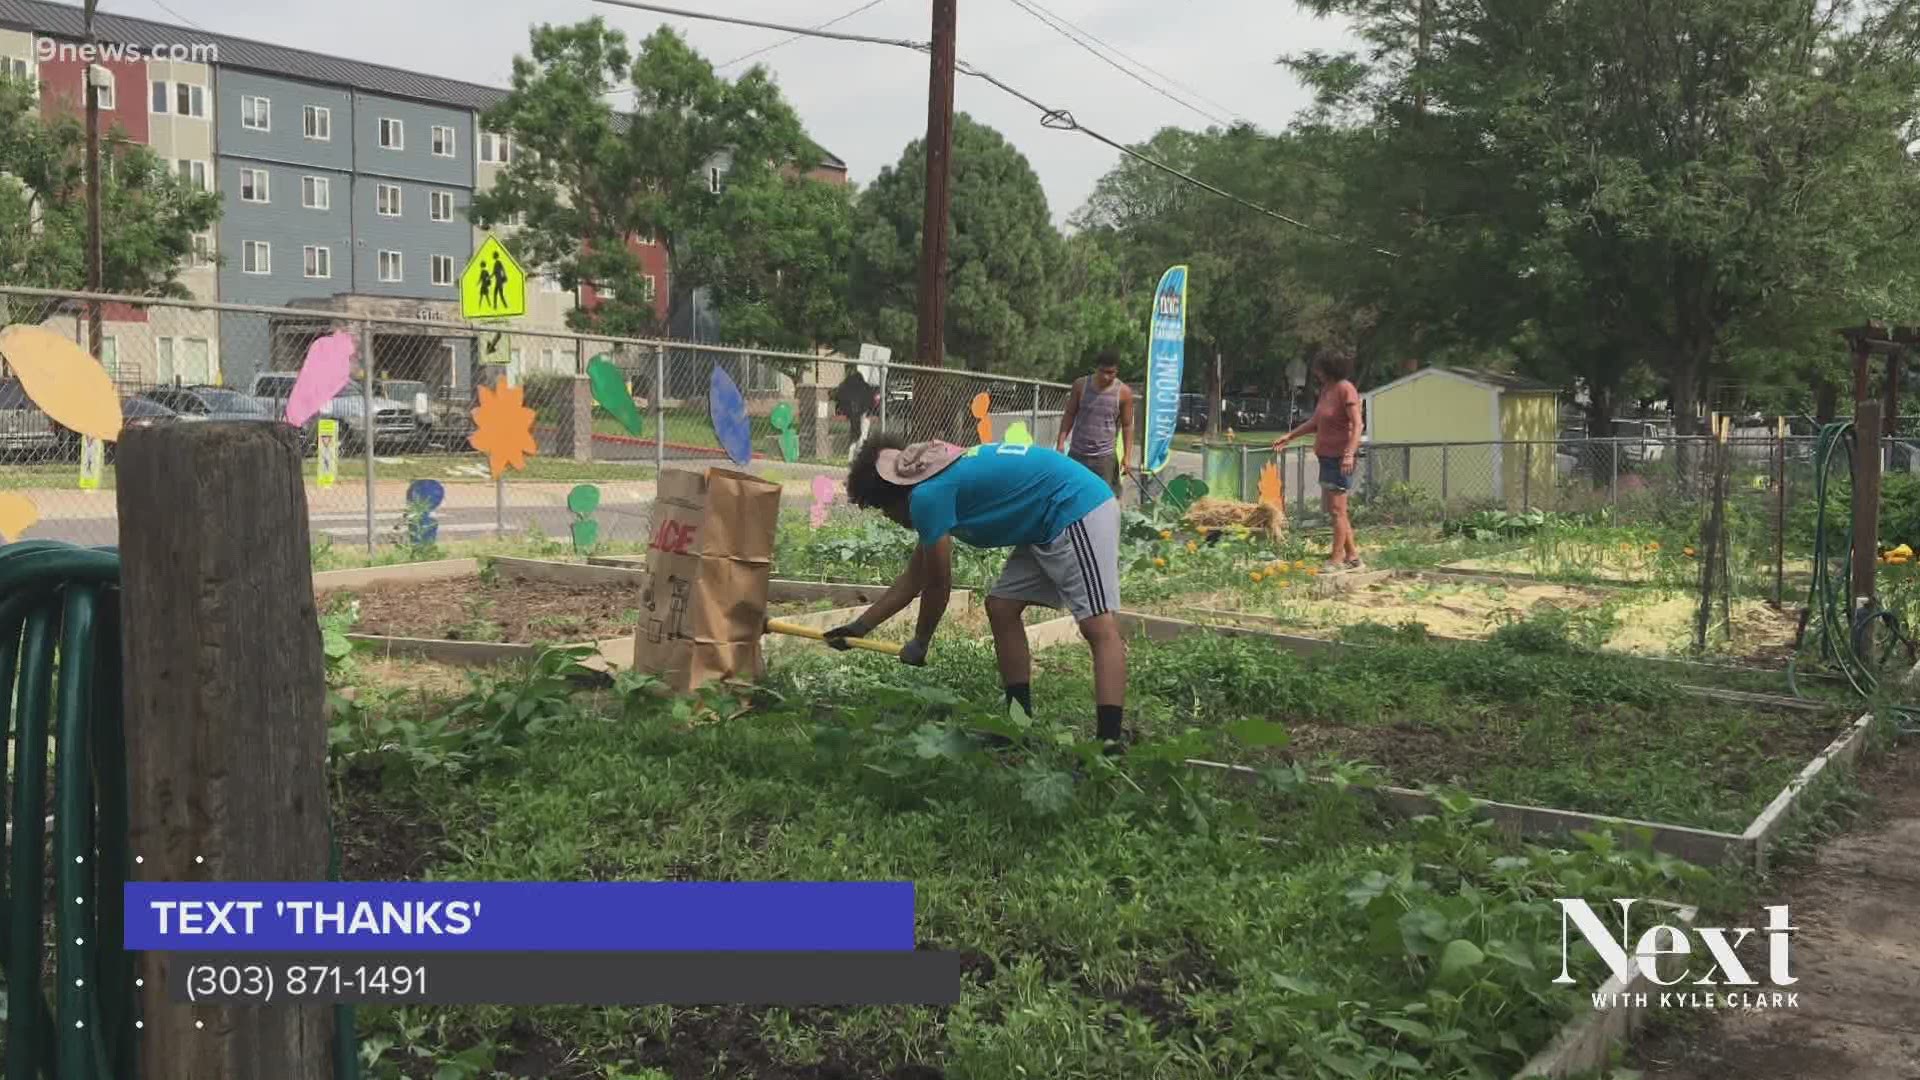 This week, donations will go to Denver Urban Gardens to provide infrastructure upgrades to existing community gardens and reduce barriers to growing fresh food.